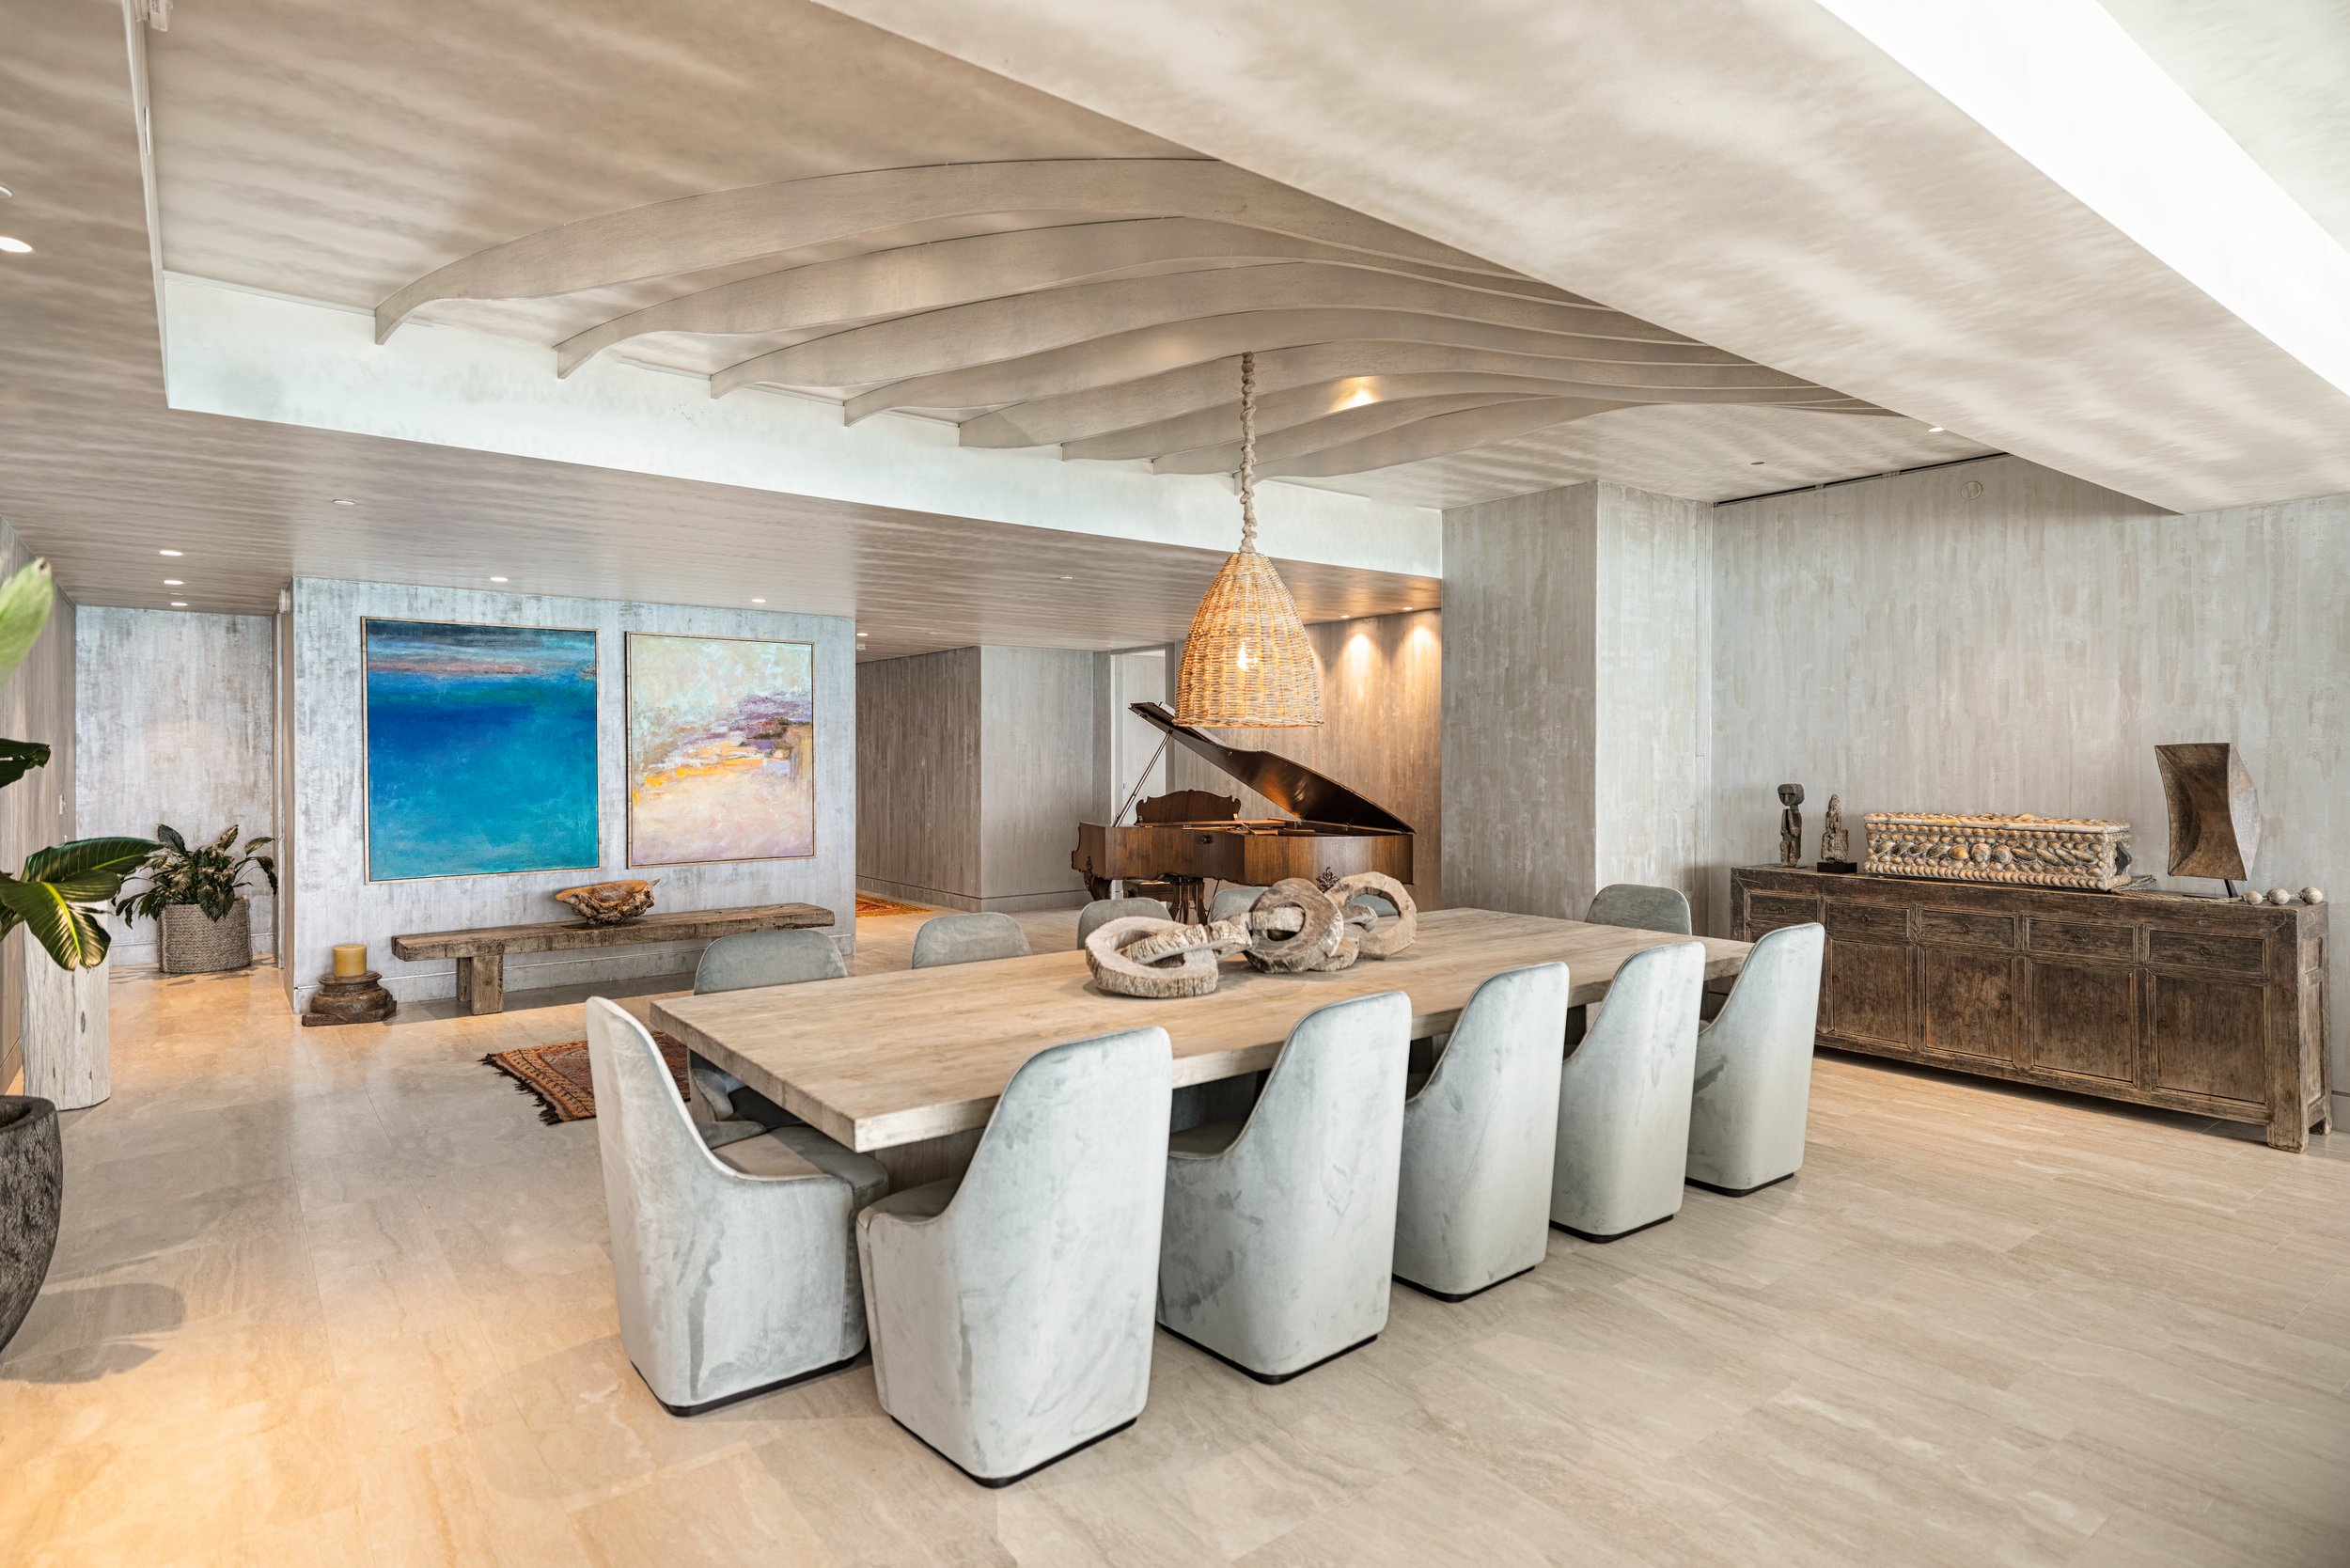 Check Out This Lavish Condo With Custom Wave Ceilings Asking $37 Million At Four Seasons at The Surf Club In Surfside 4.jpg